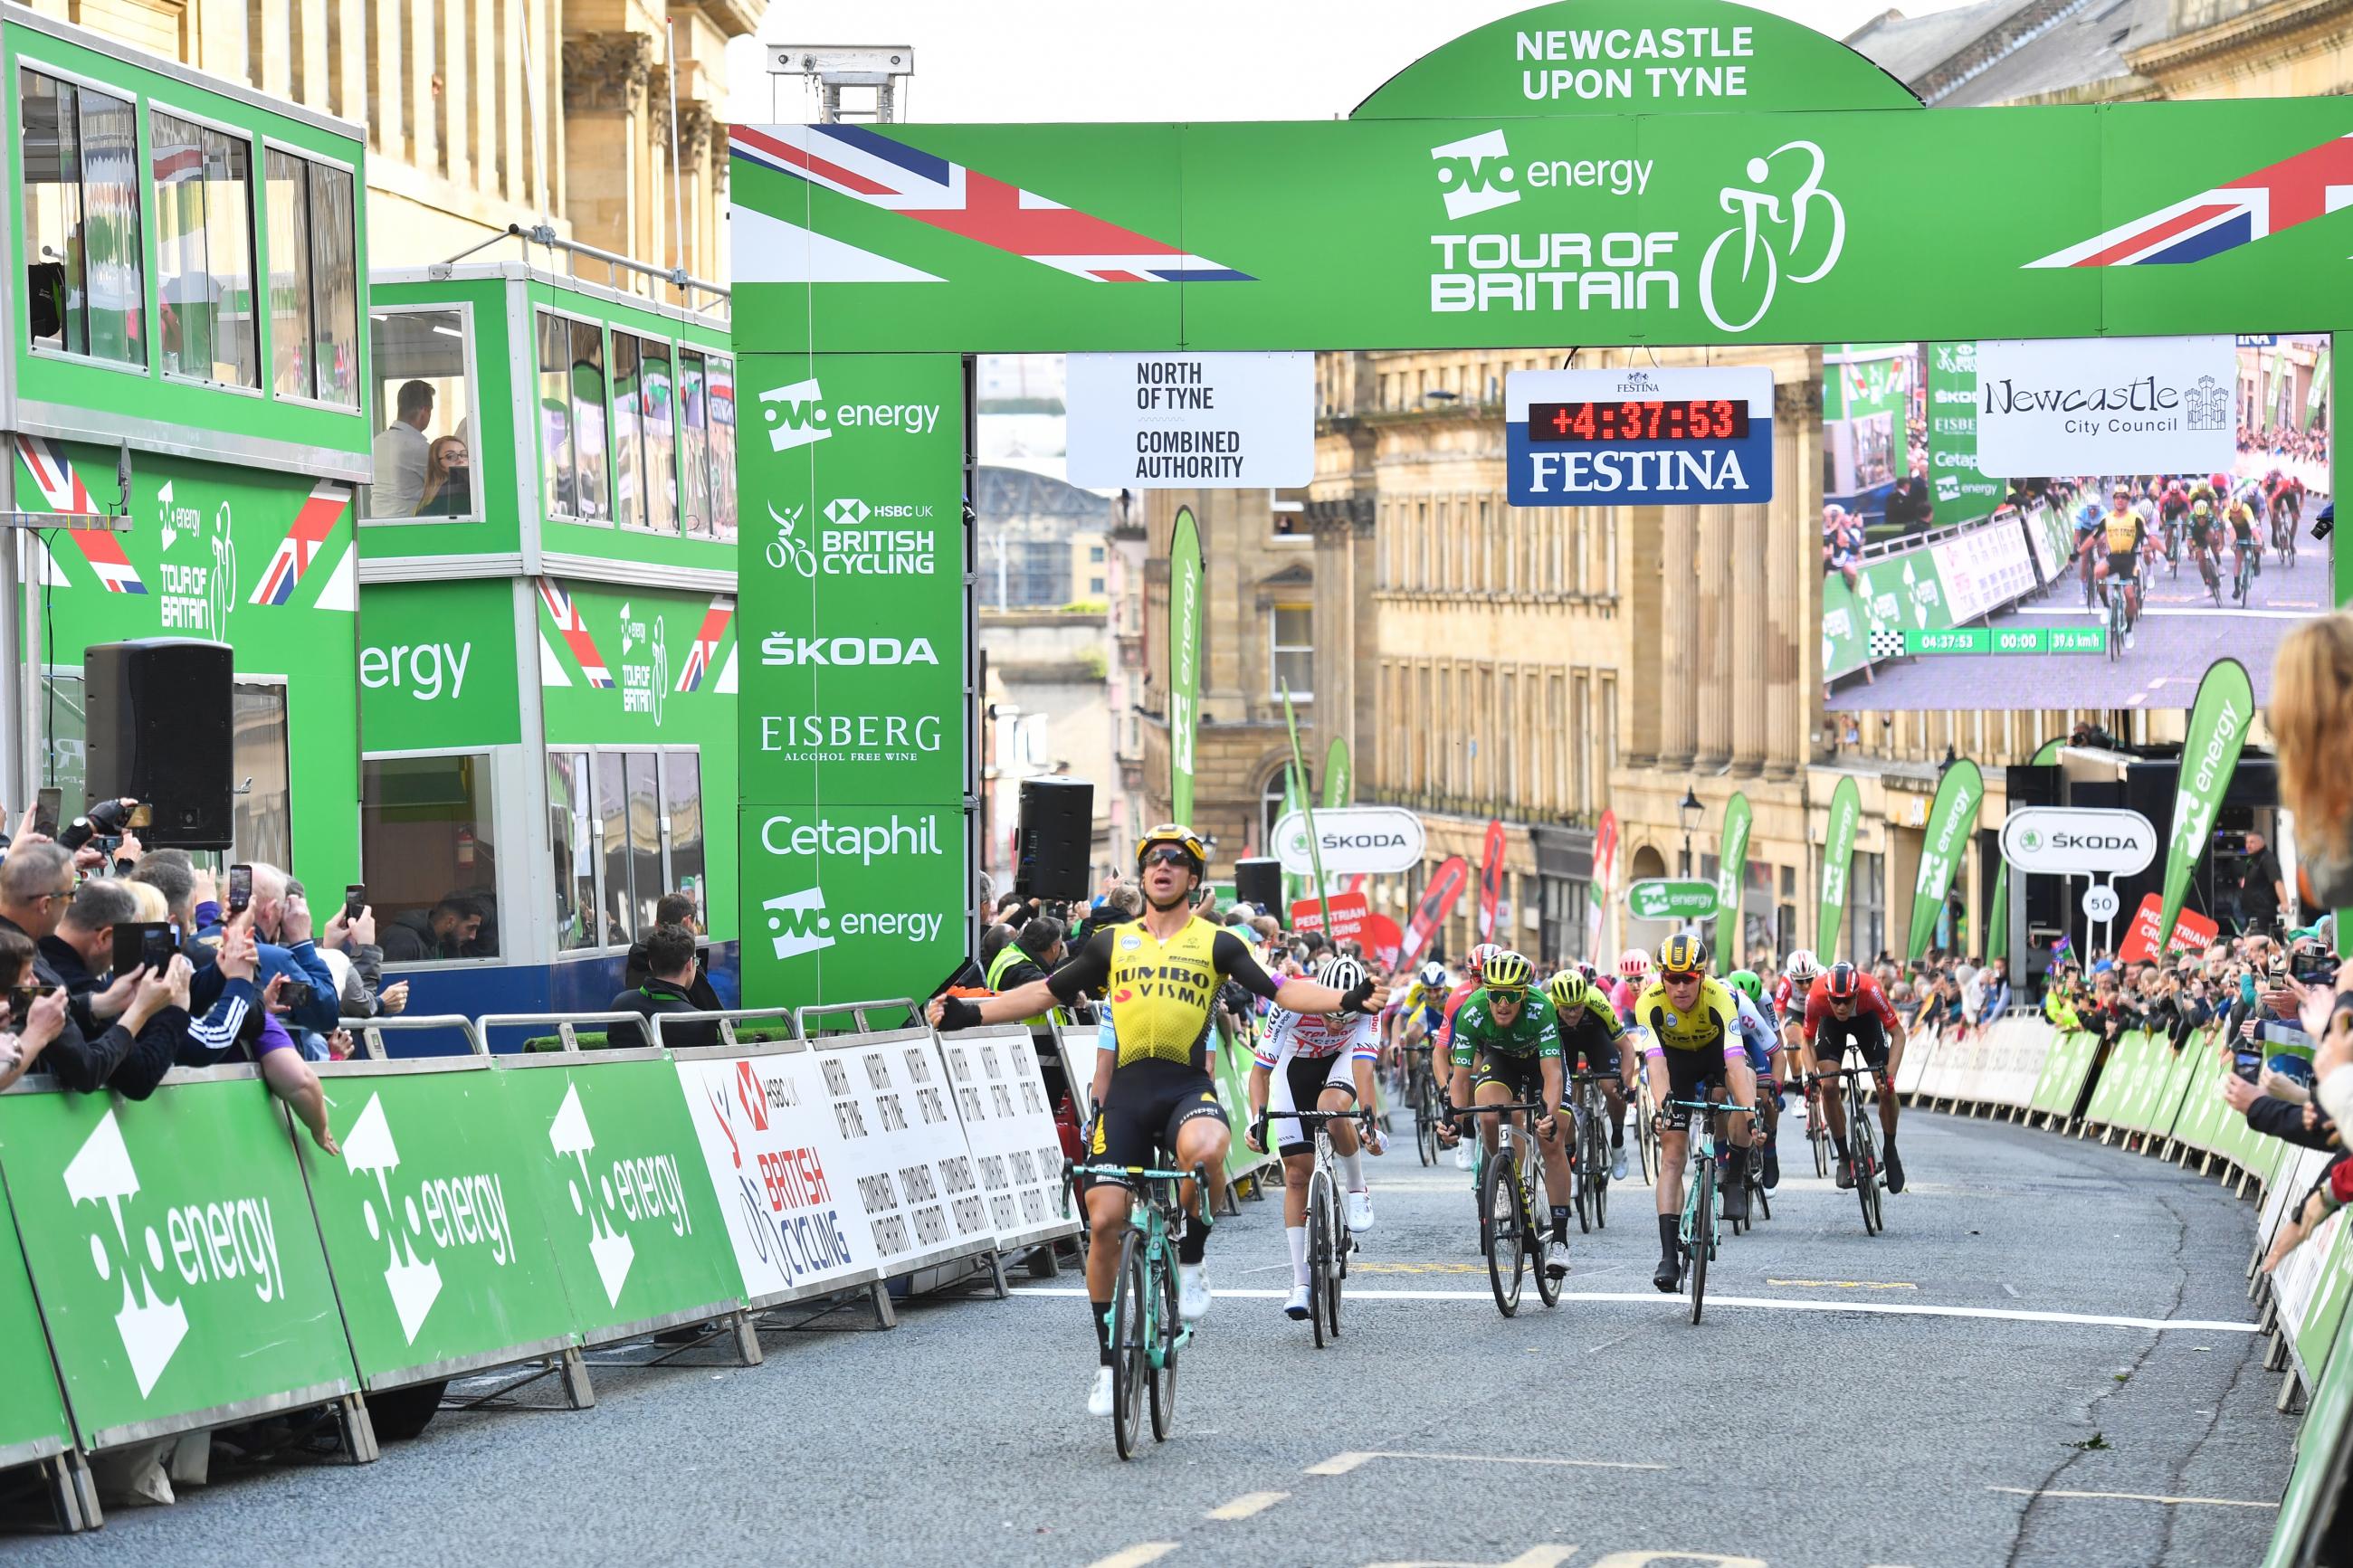 Dylan Groenewegen takes victory in the Tour of Britain stage finish on Grey Street